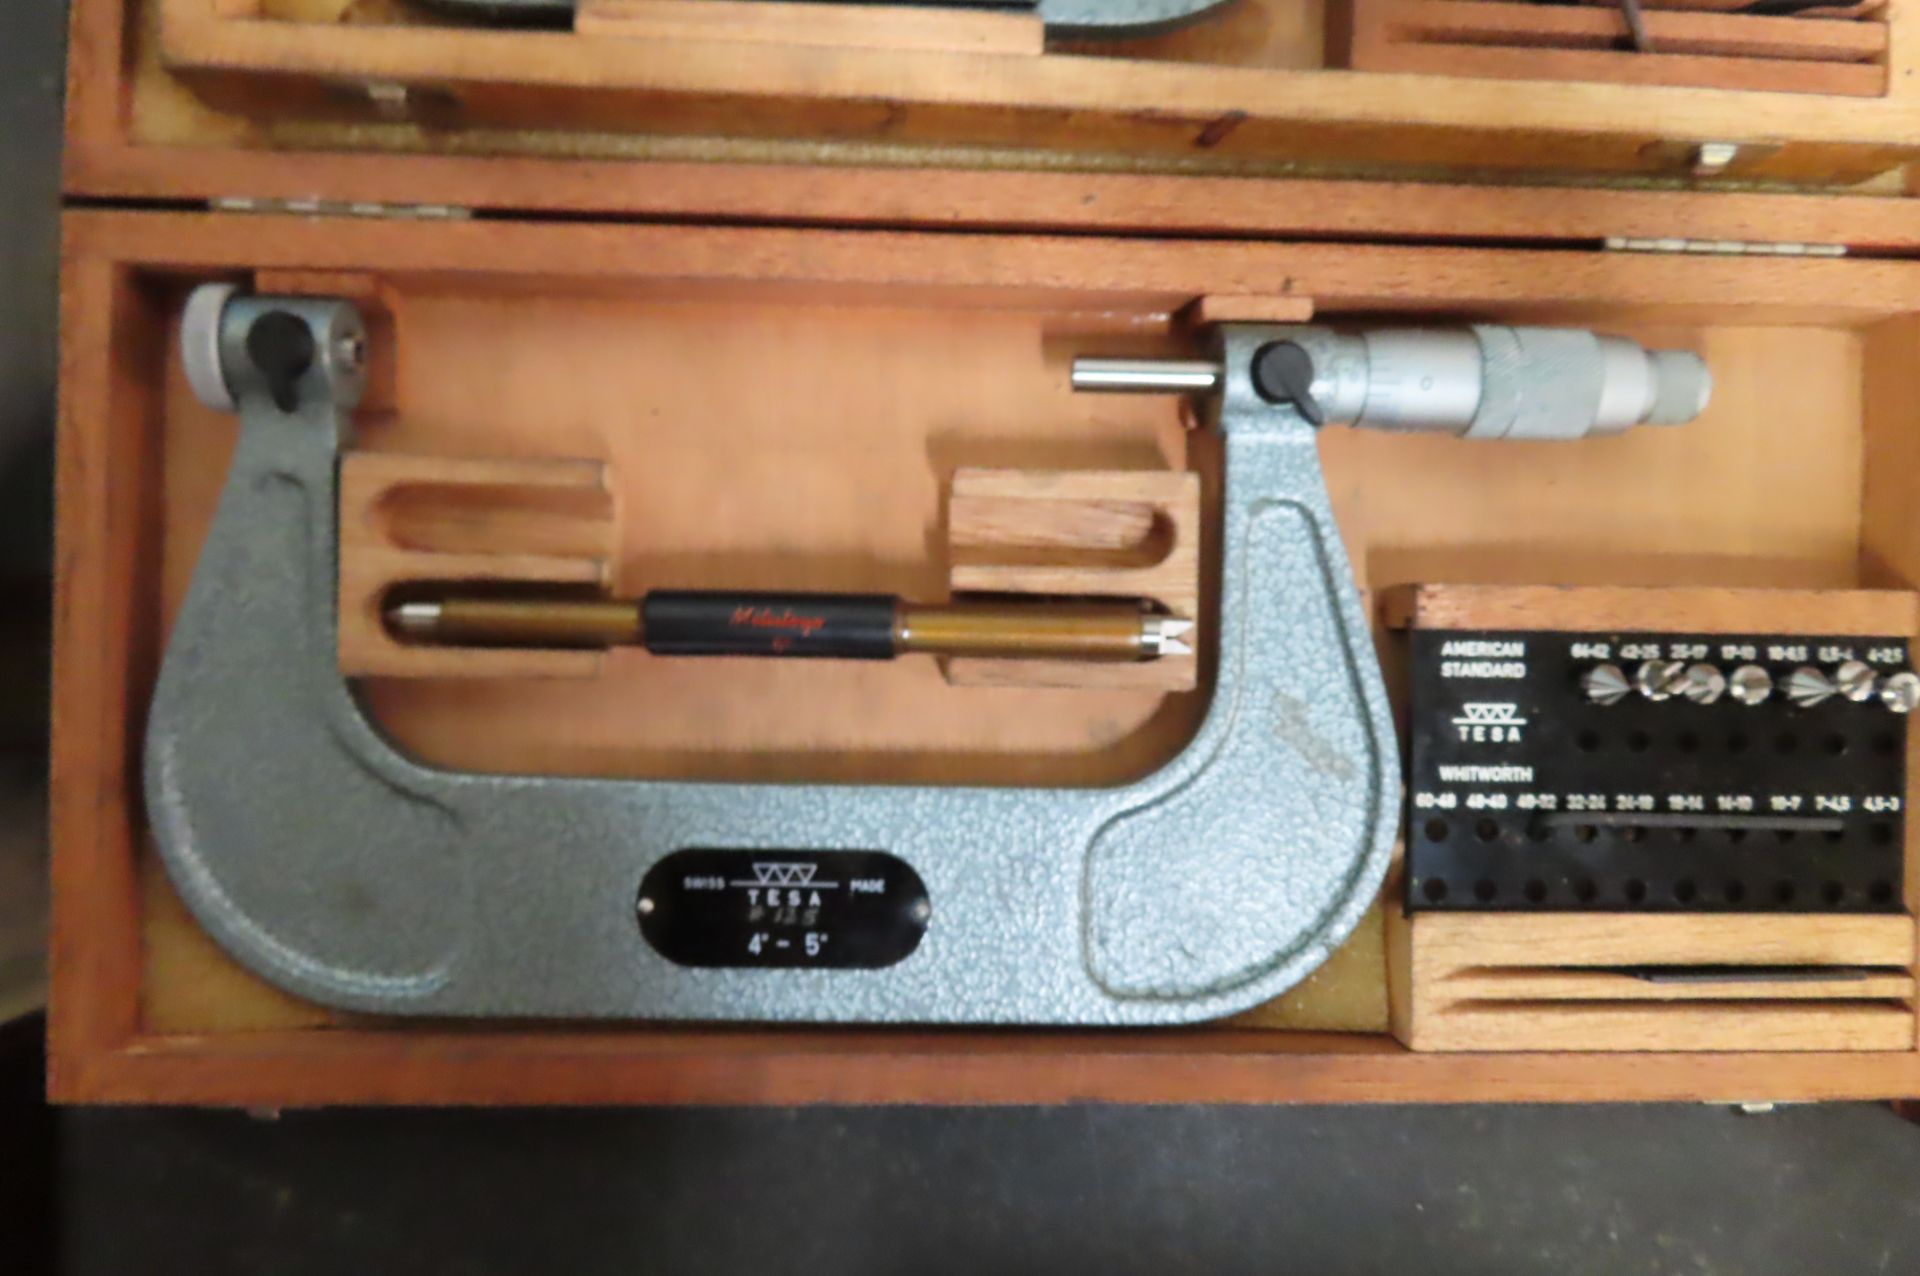 (5) TESA THREAD MICROMETERS, 0-1, 1-2, 2-3 3-4 AND 4-5 IN, MISSING ANVILS - Image 2 of 2